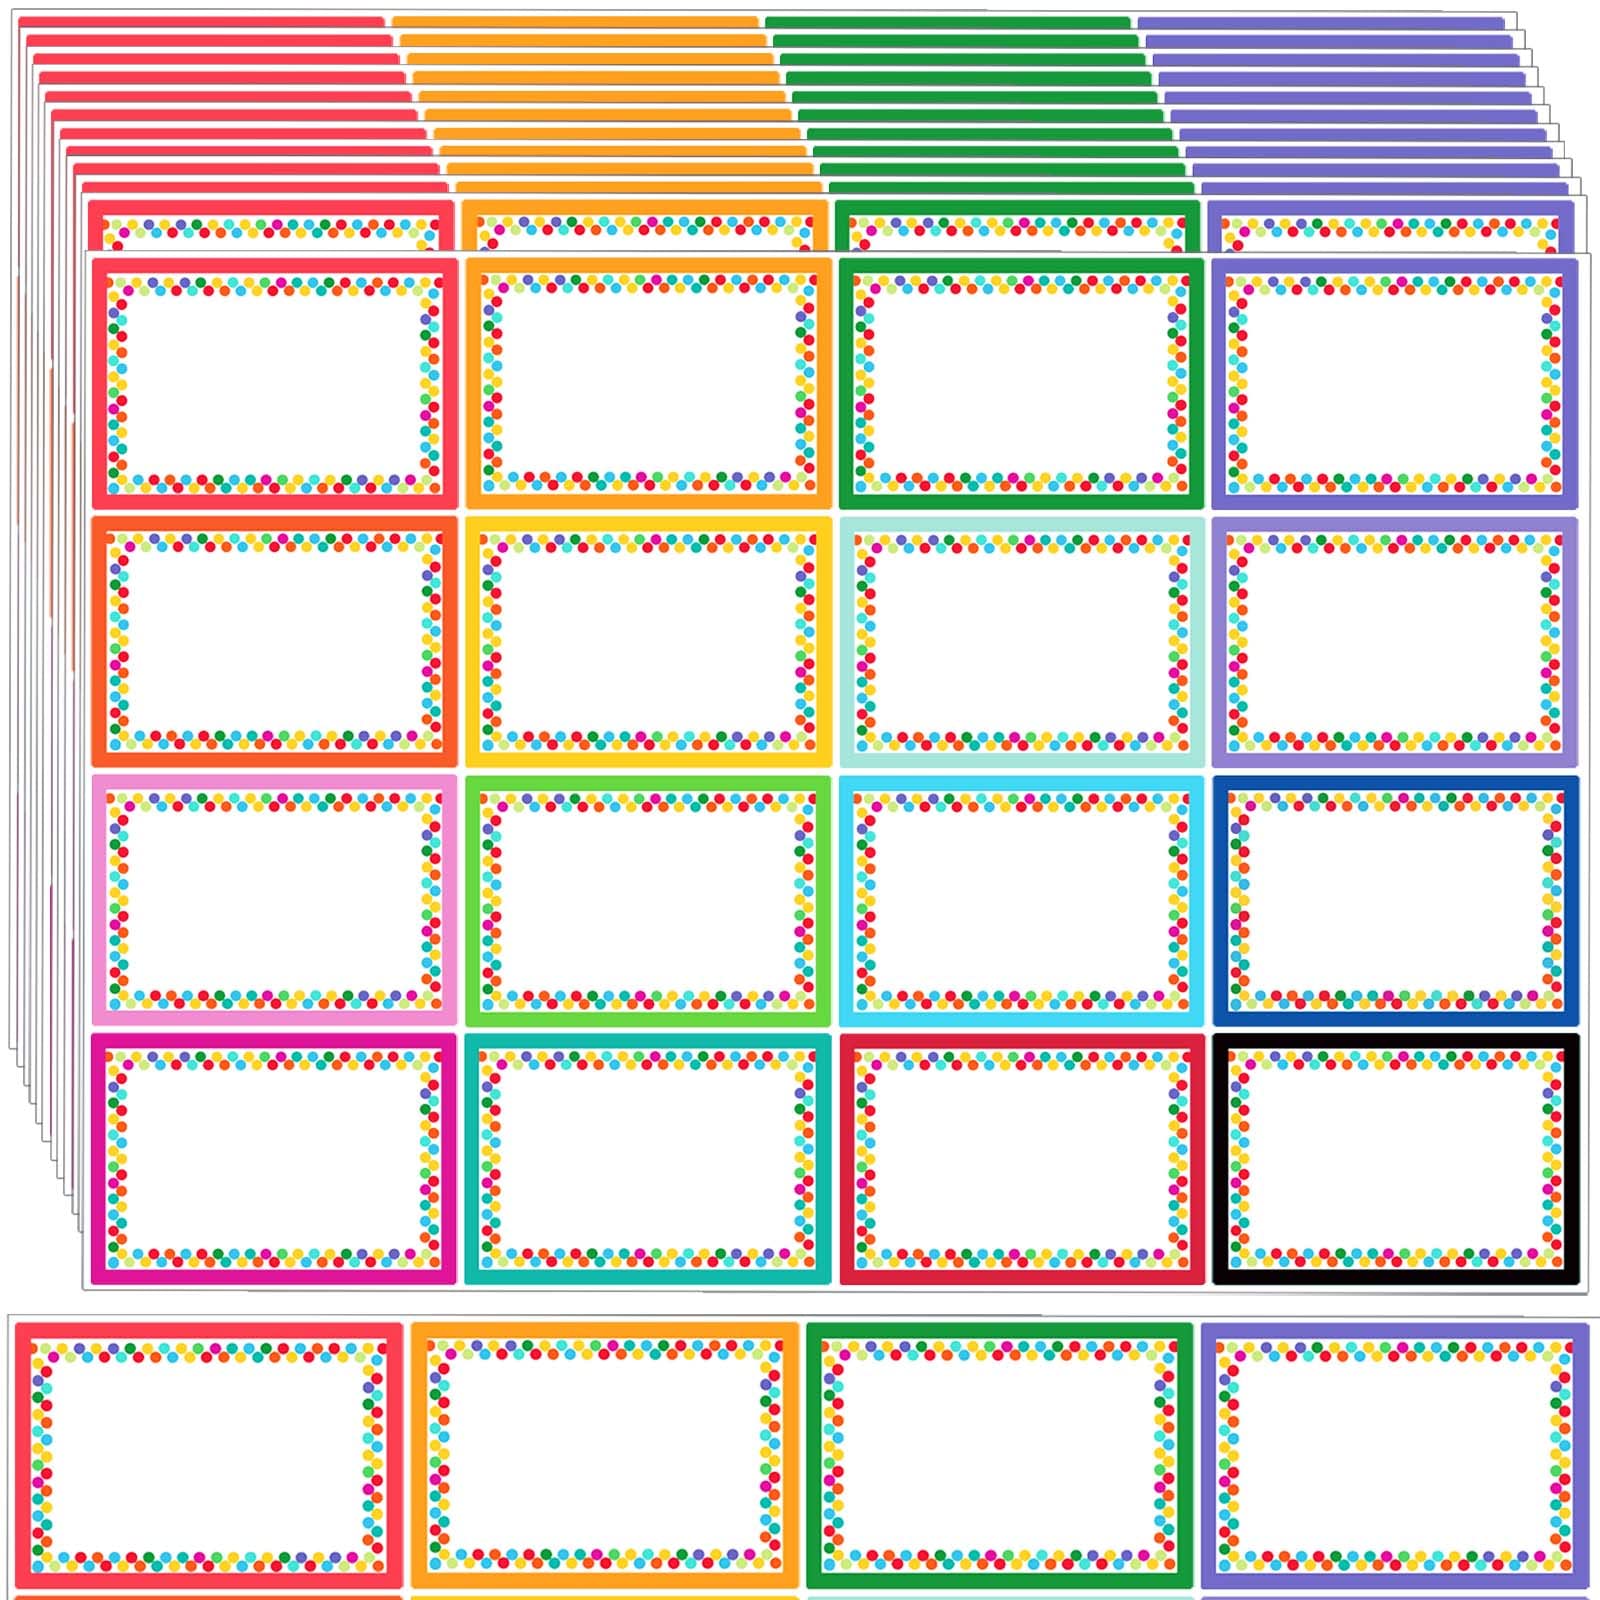 Dreecy 480 PCS Name Tags Stickers (3" x 2"), 16 Style Colorful Name Tags Labels for Classroom Name Badge Nametags Stickers for Themed Party, School, Office, Home